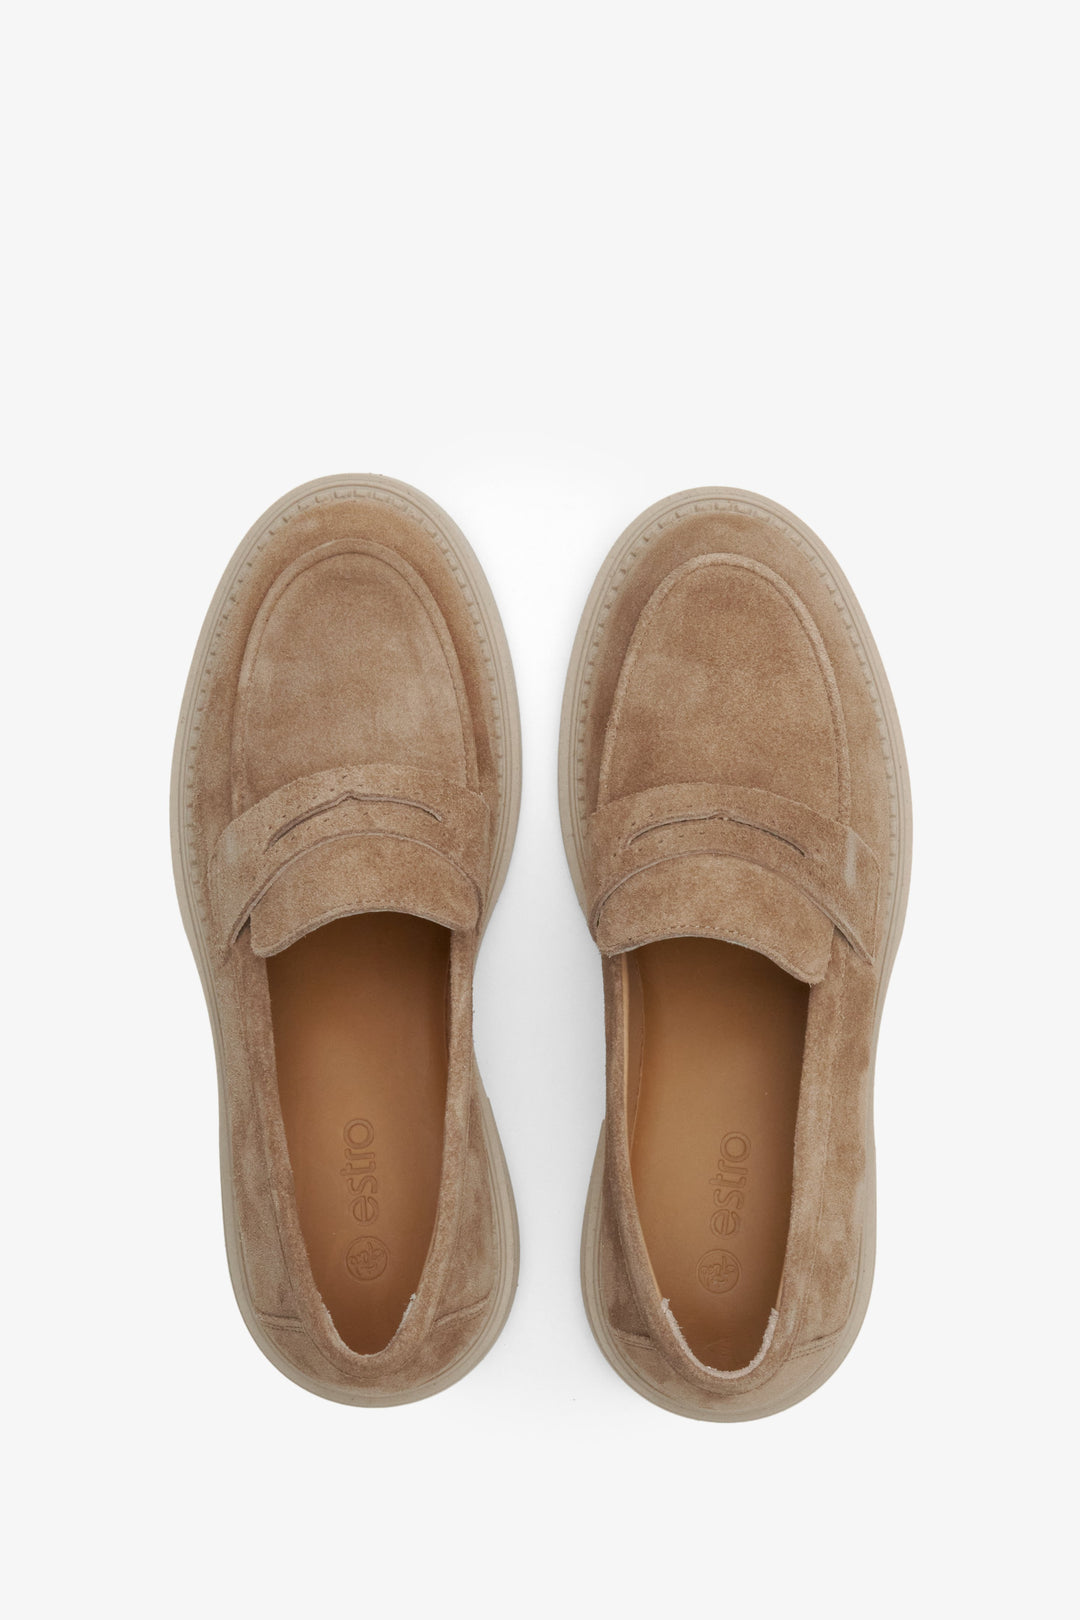 Brown velour loafers for women Estro - presentation of the model from above.